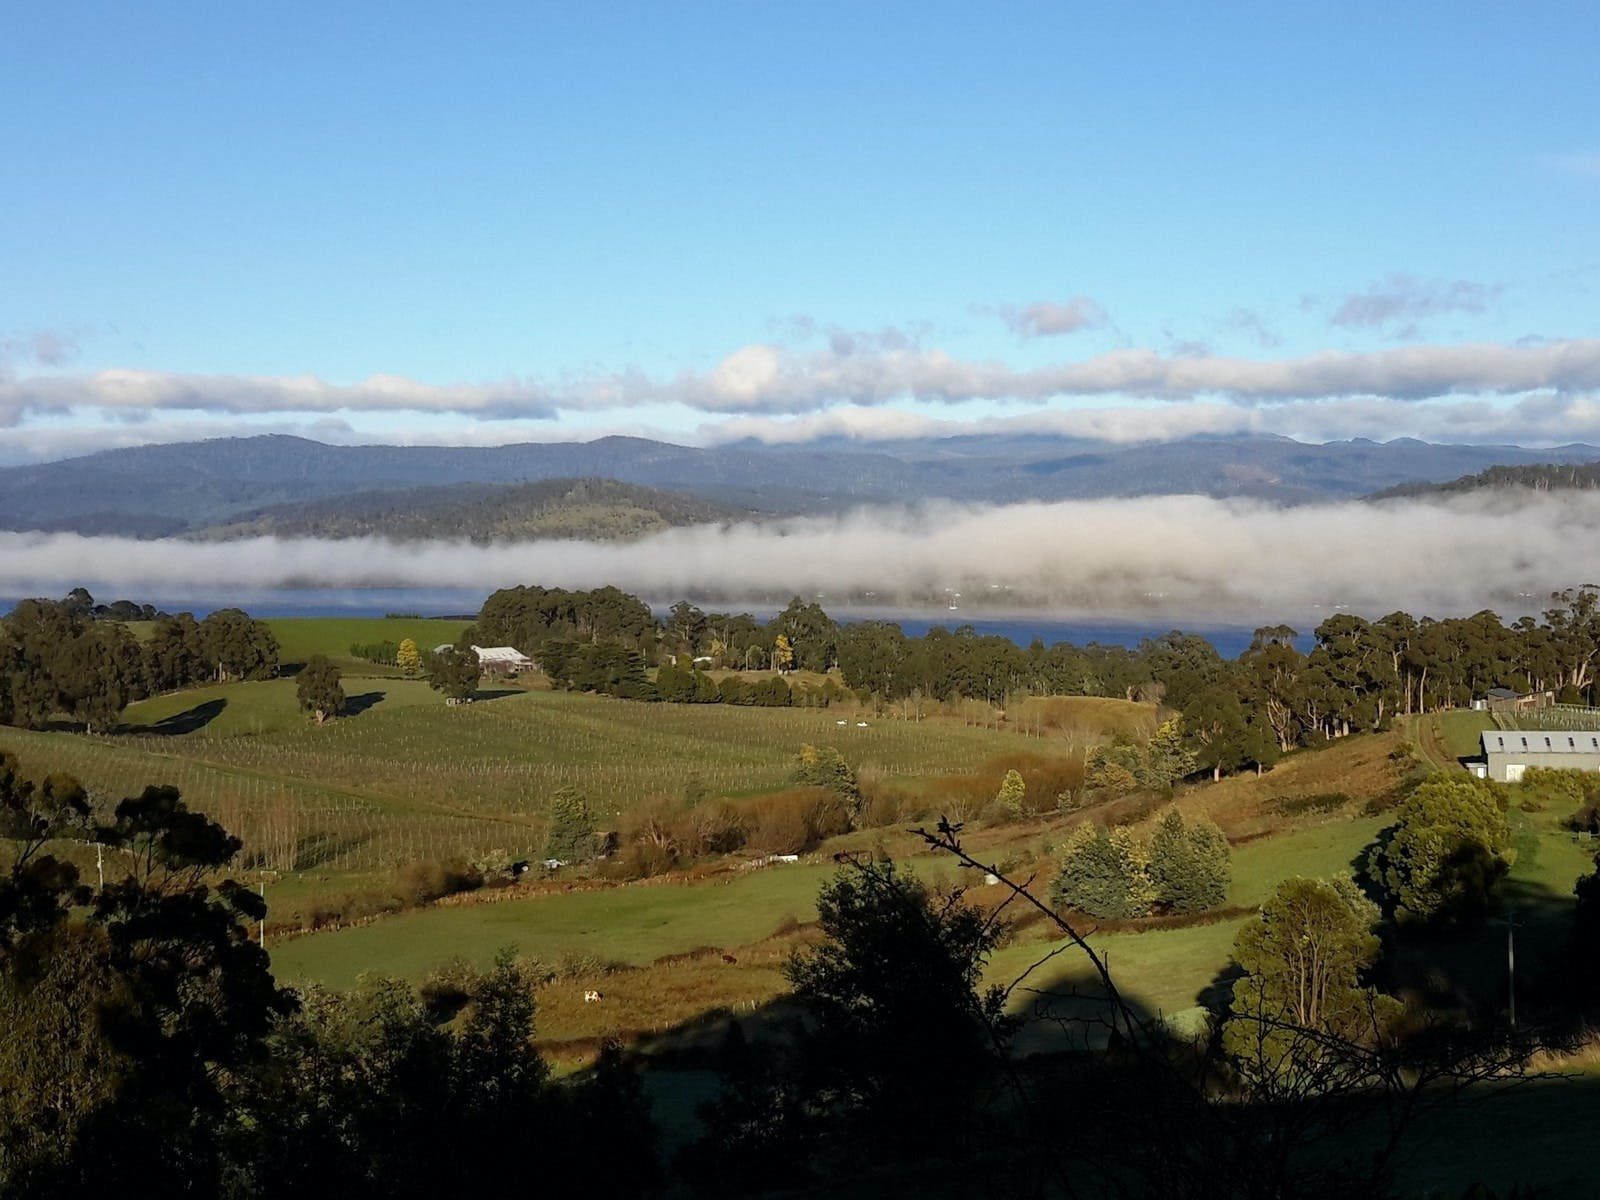 View SSW to river, Hartz mountains, vineyards, clouds laying on river, early spring morning, trees